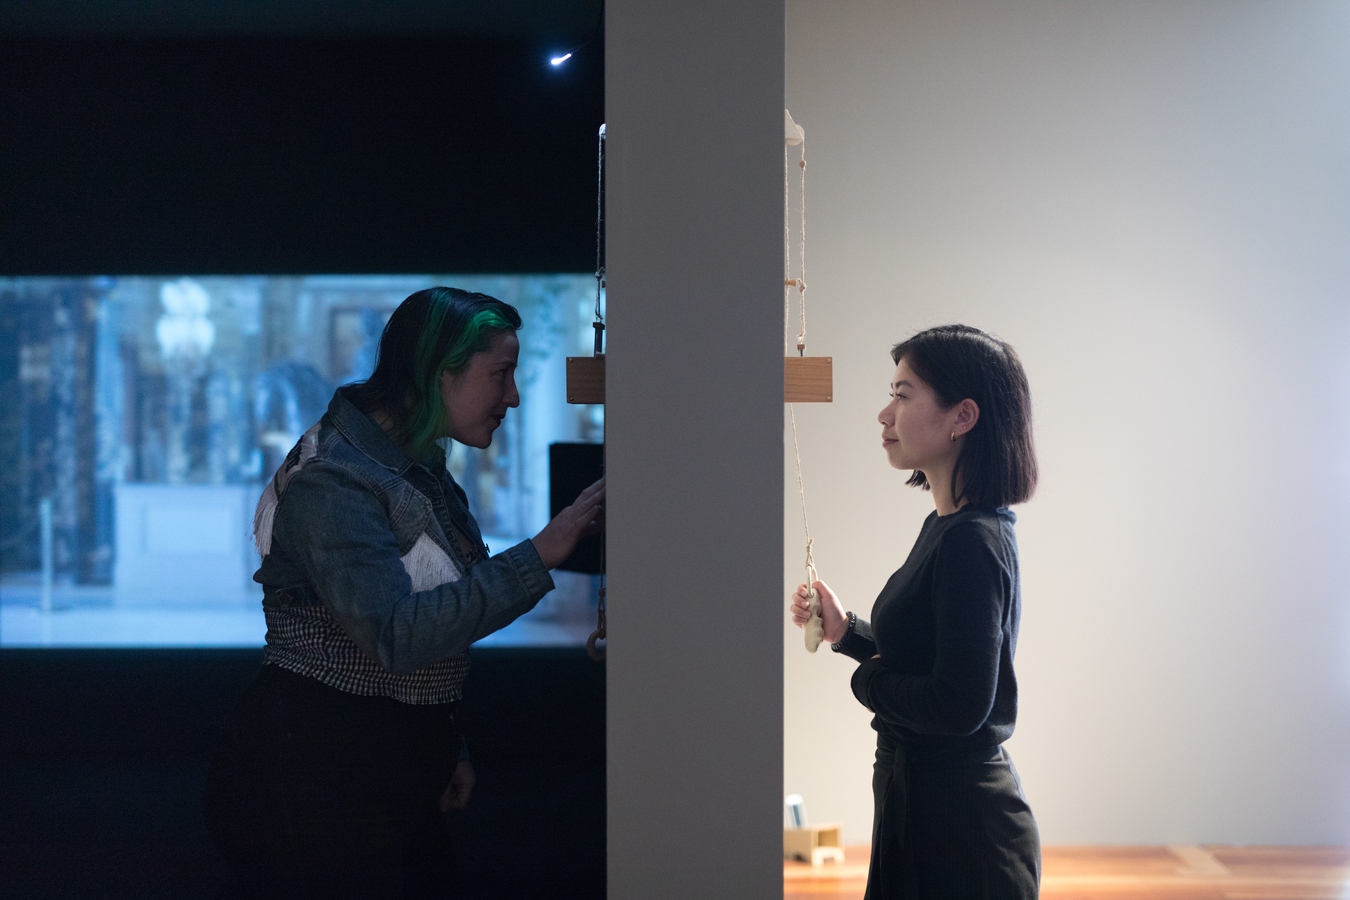 Image: Min-Young Her and Orissa Keane, Seeing Eye to Eye / The Nature of Collaboration (installation view), 2020. Photo: Janneth Gil.